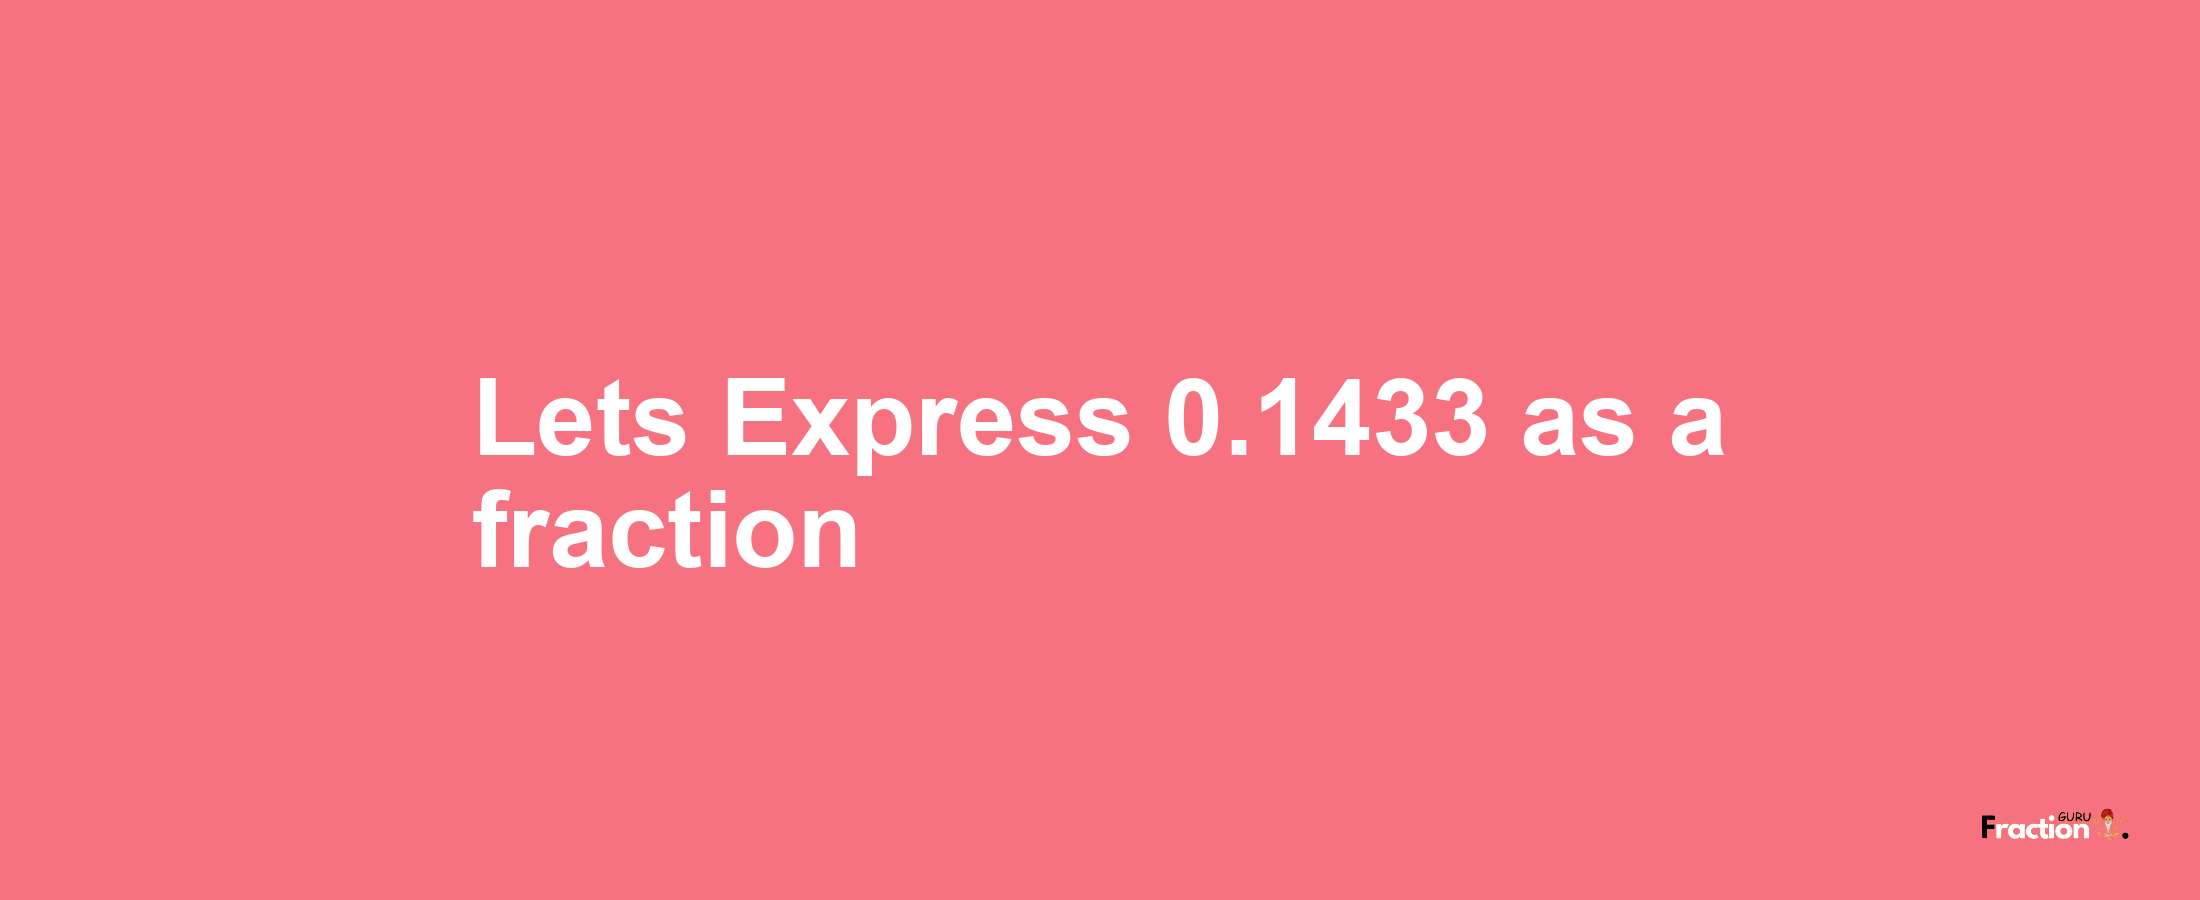 Lets Express 0.1433 as afraction